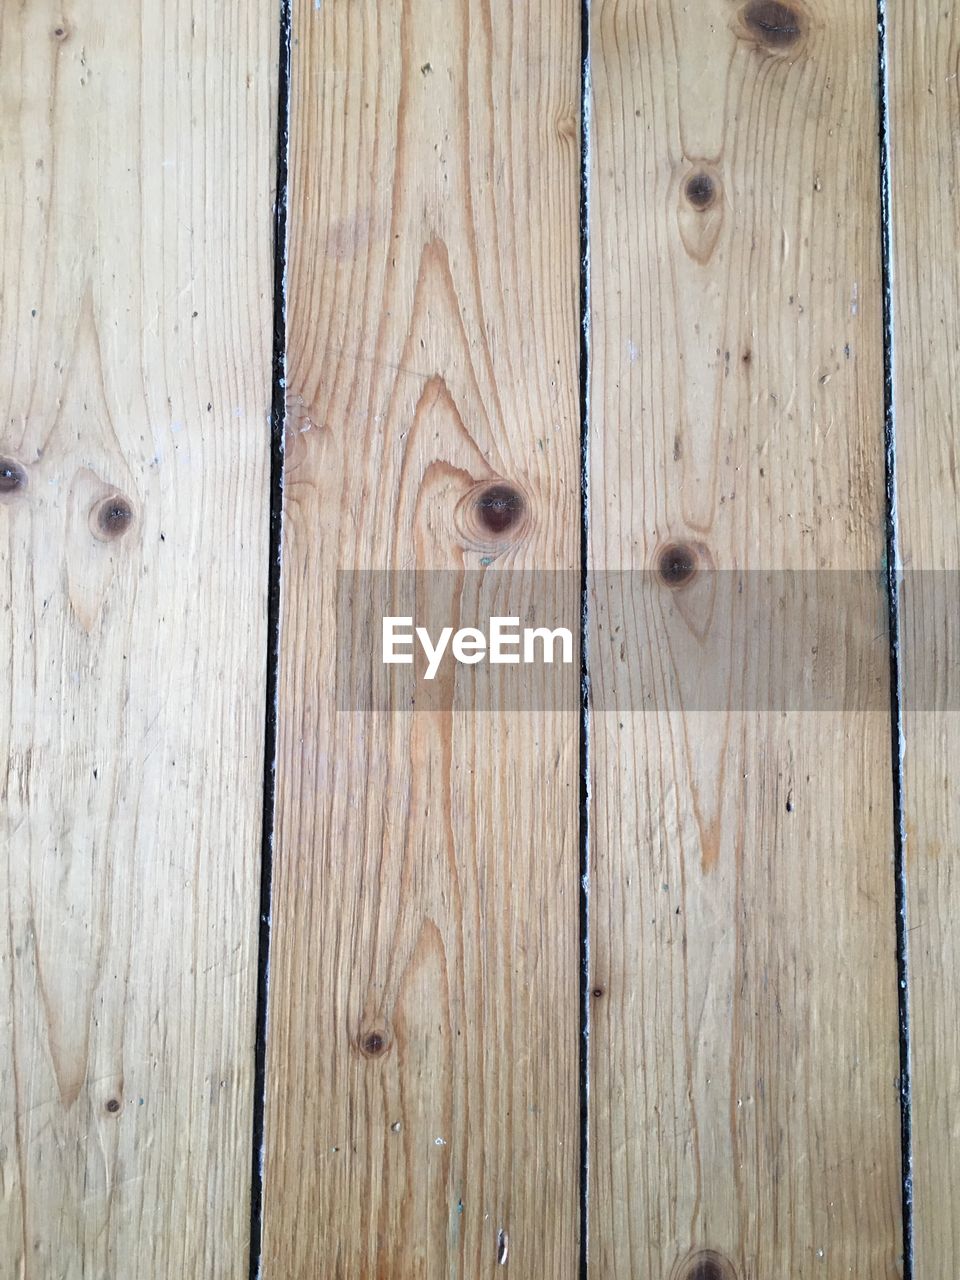 FULL FRAME SHOT OF WEATHERED WOODEN PLANK